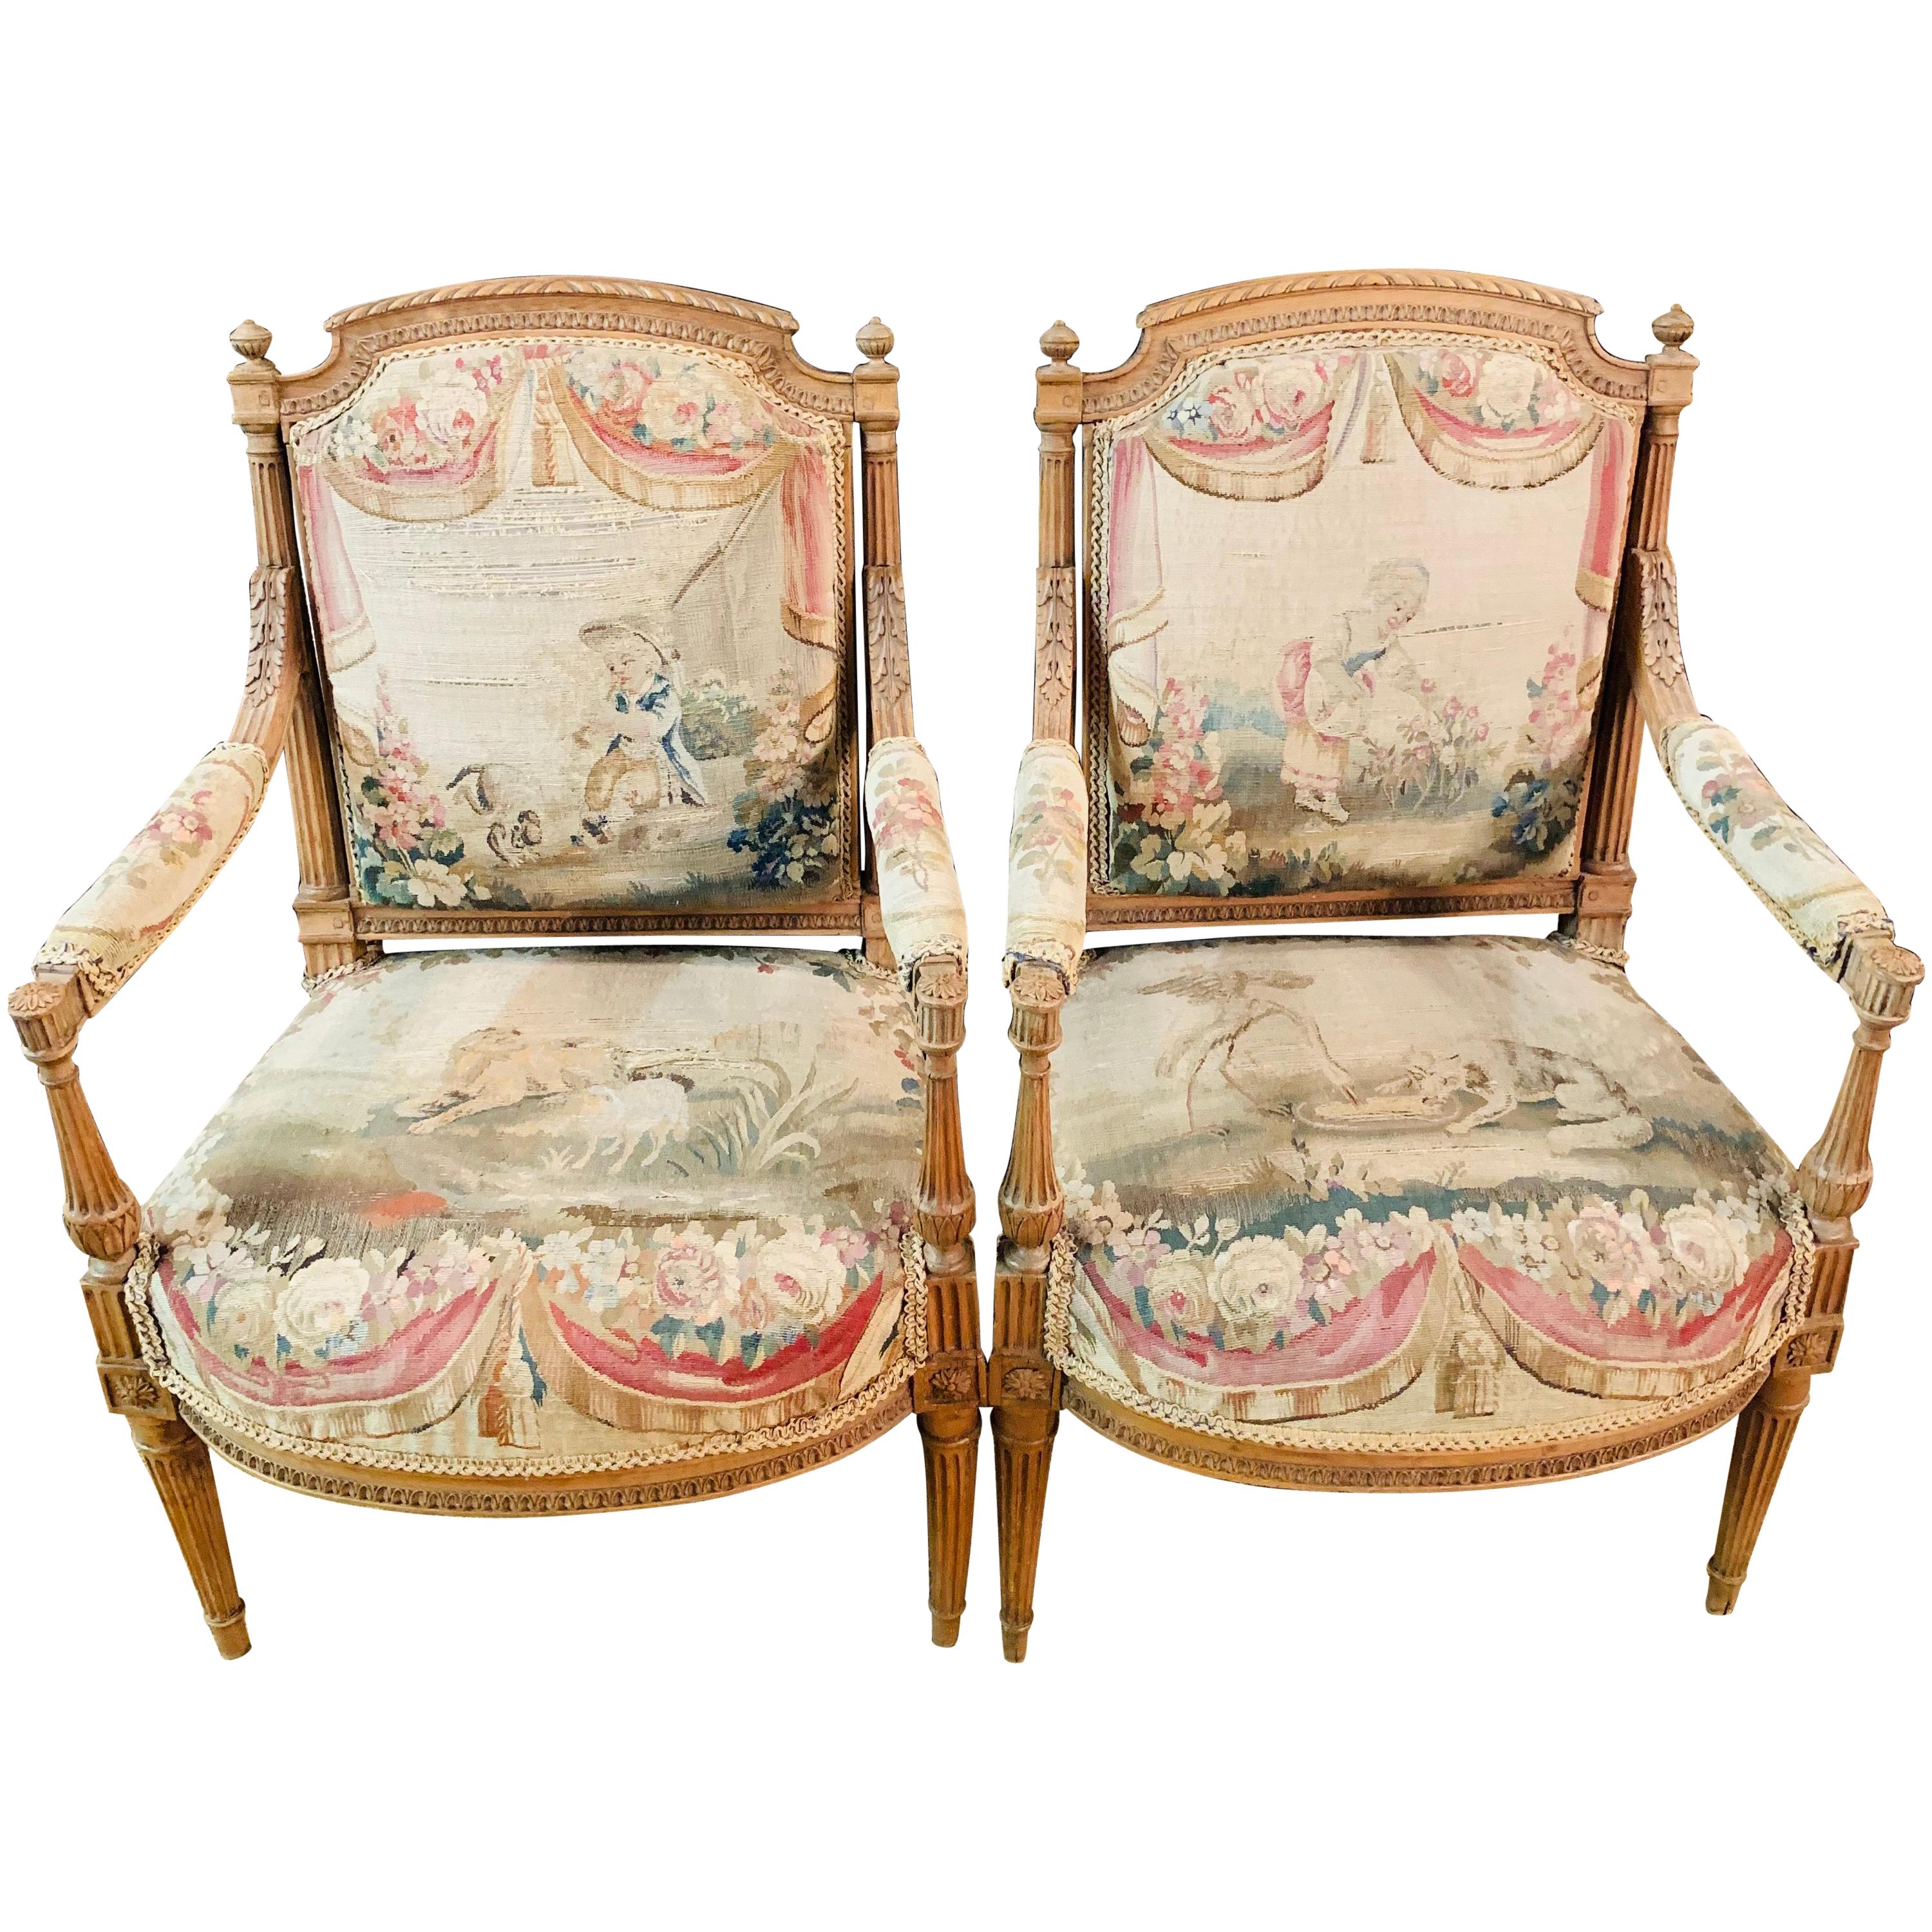 Unique Salon Chairs, France 19th Century, Solid Beech with Oak Tapestry/Gobelin